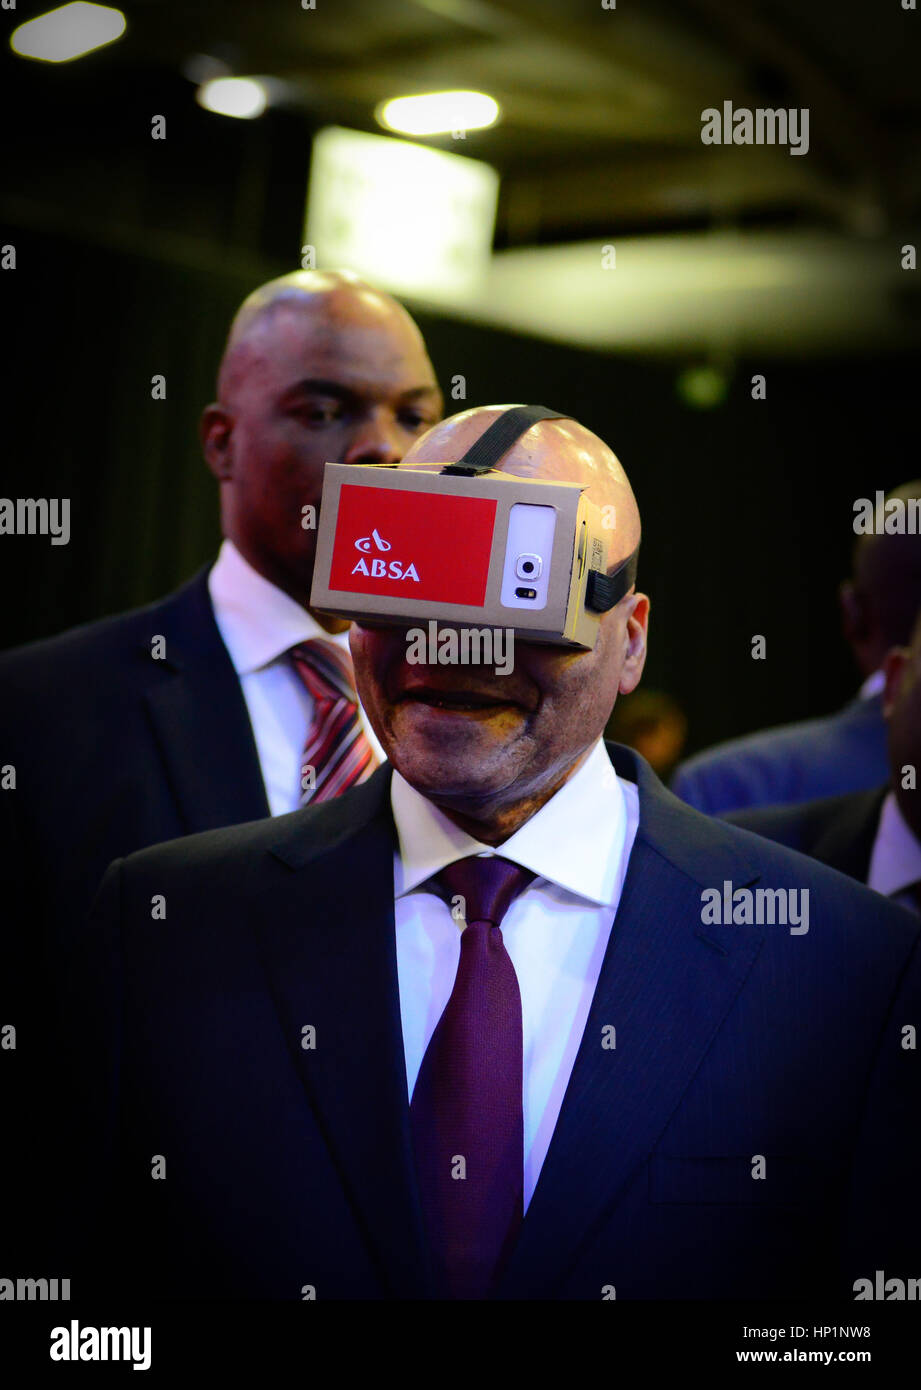 (170217) -- JOHANNESBURG, Feb. 17, 2017 (Xinhua) -- File photo taken on April 7, 2016 shows South African President Jacob Zuma tries a VR device provided by Amalgamated Banks of South Africa (ABSA) during the launch of the eChannel Pilot Project of the Department of Home Affairs at Gallagher Convention Center in Midrand, near Johannesburg,?South?Africa.?The South African government is prepared to act against market abuse, price-fixing and collusion in the private sector in order to protect the country's economy, President Jacob Zuma said on Feb. 16, 2017. Zuma was speaking after the Competitio Stock Photo